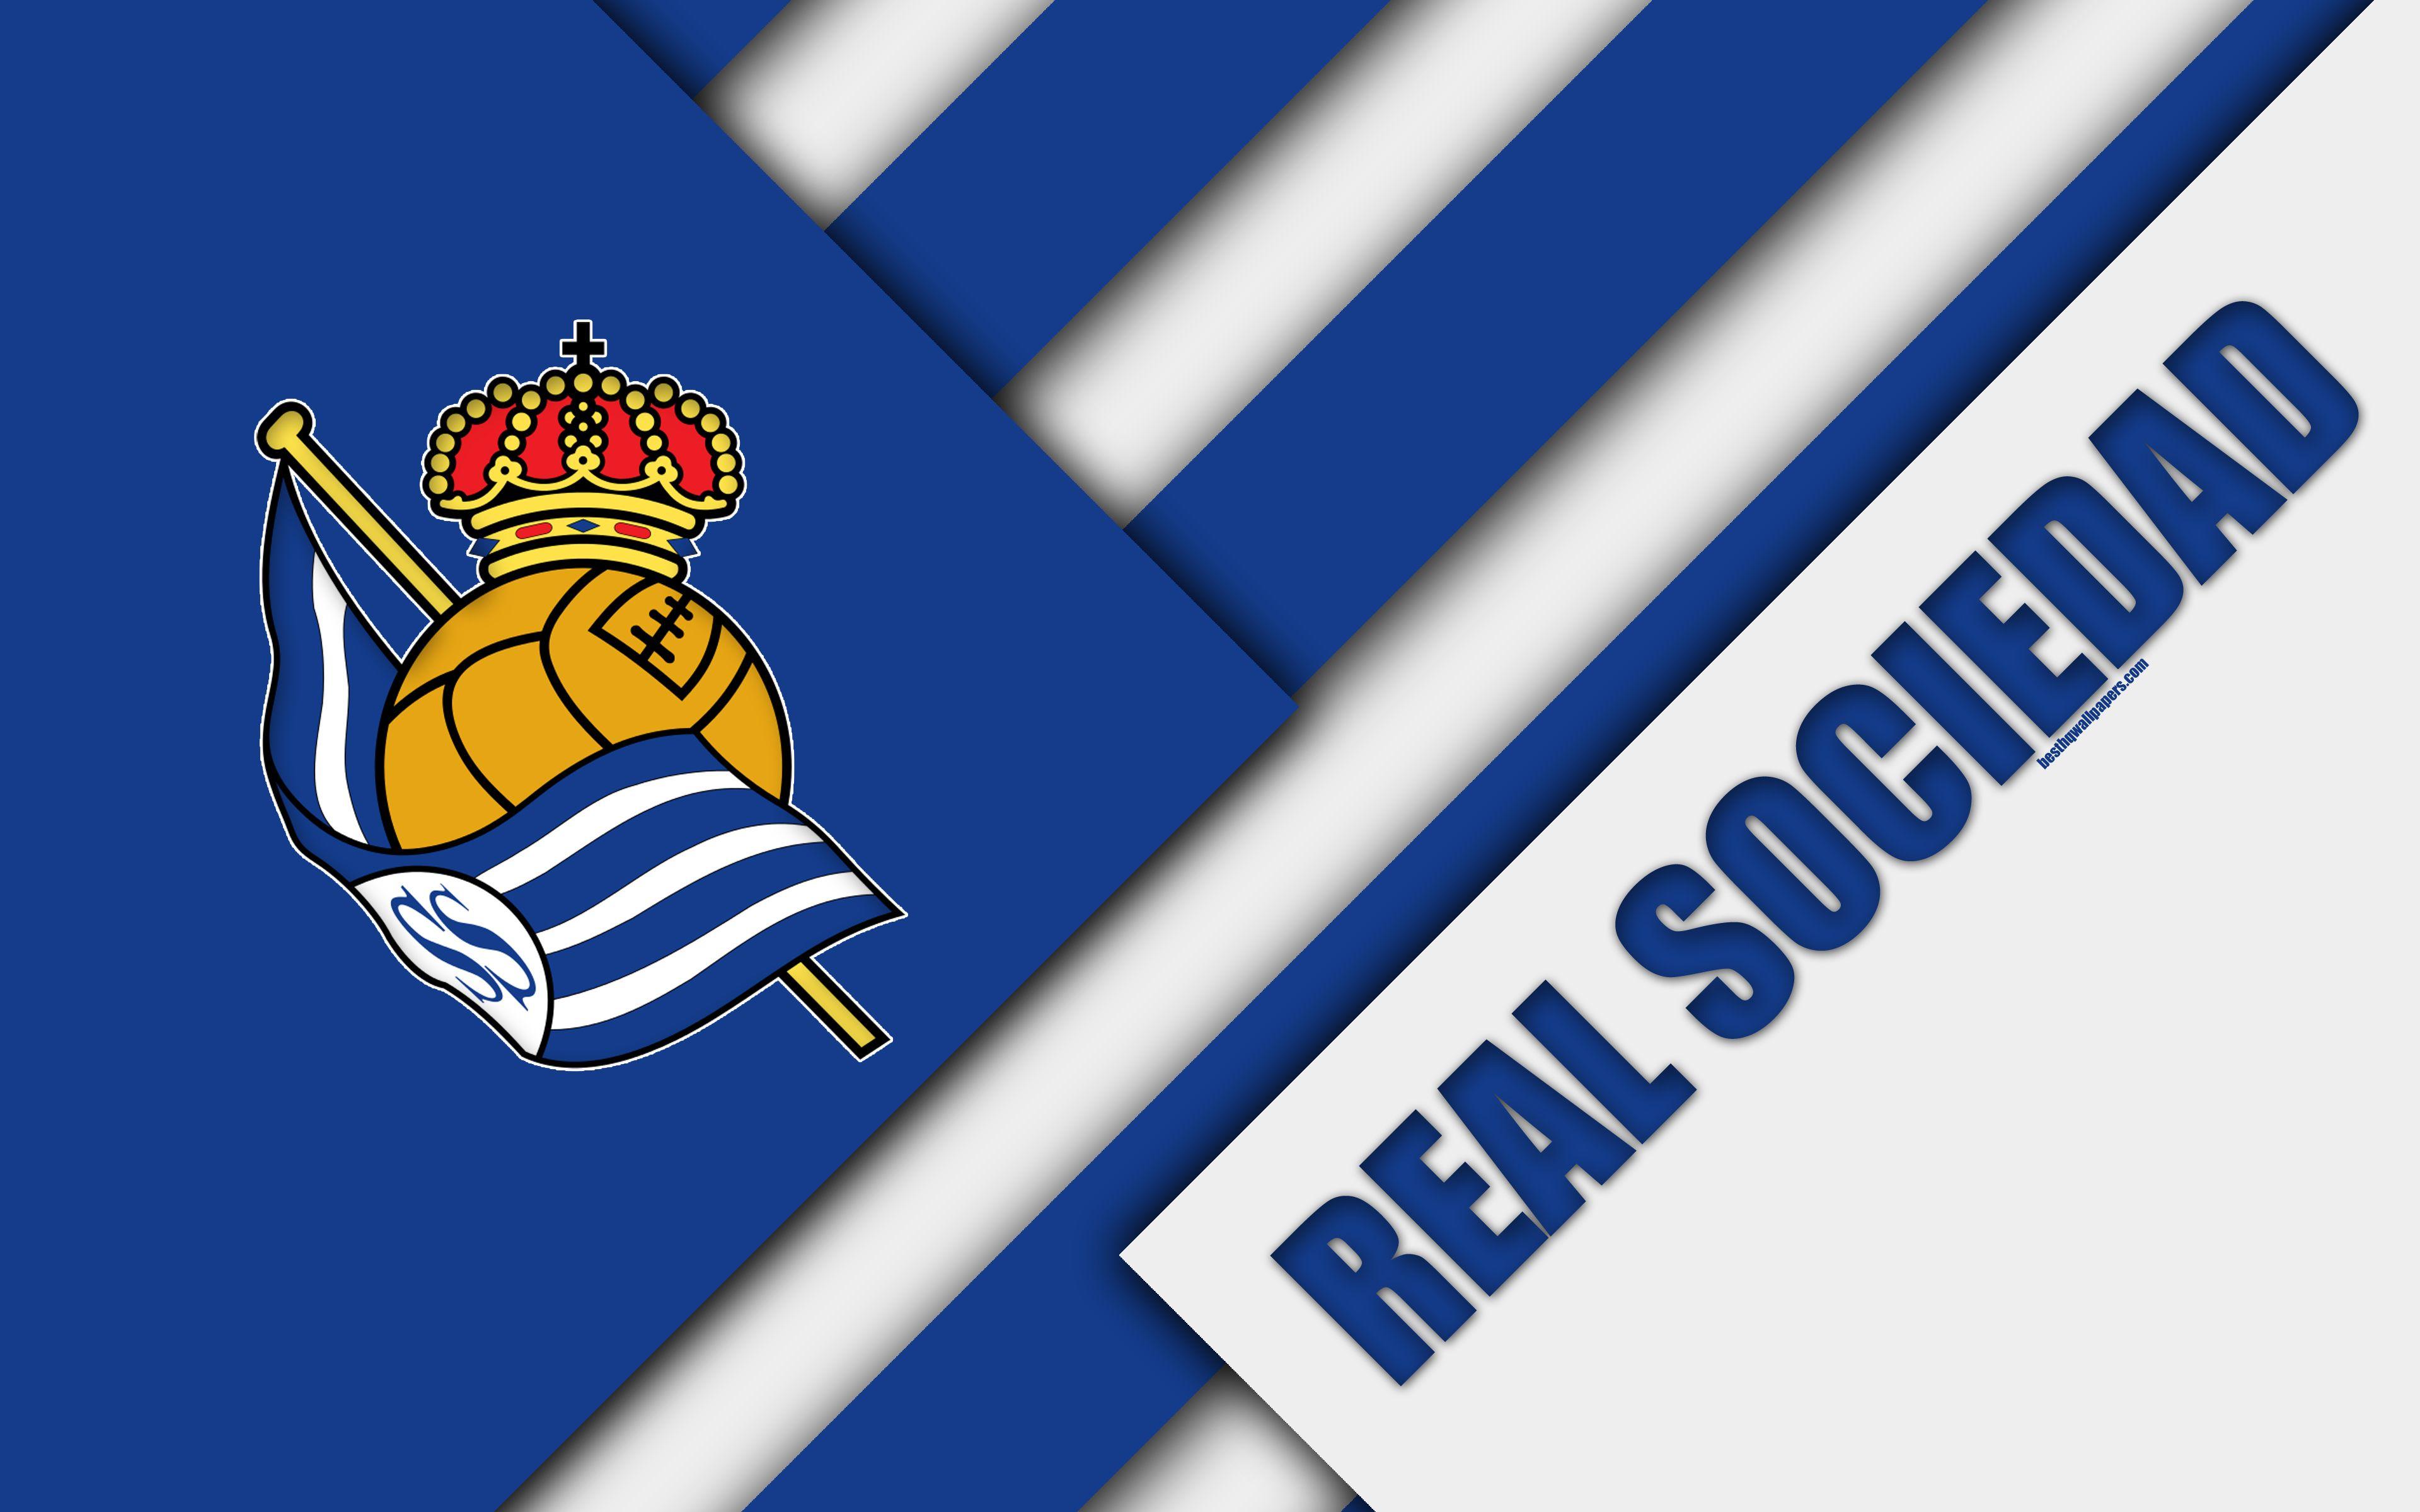 Download wallpaper Real Sociedad FC, blue white abstraction, San